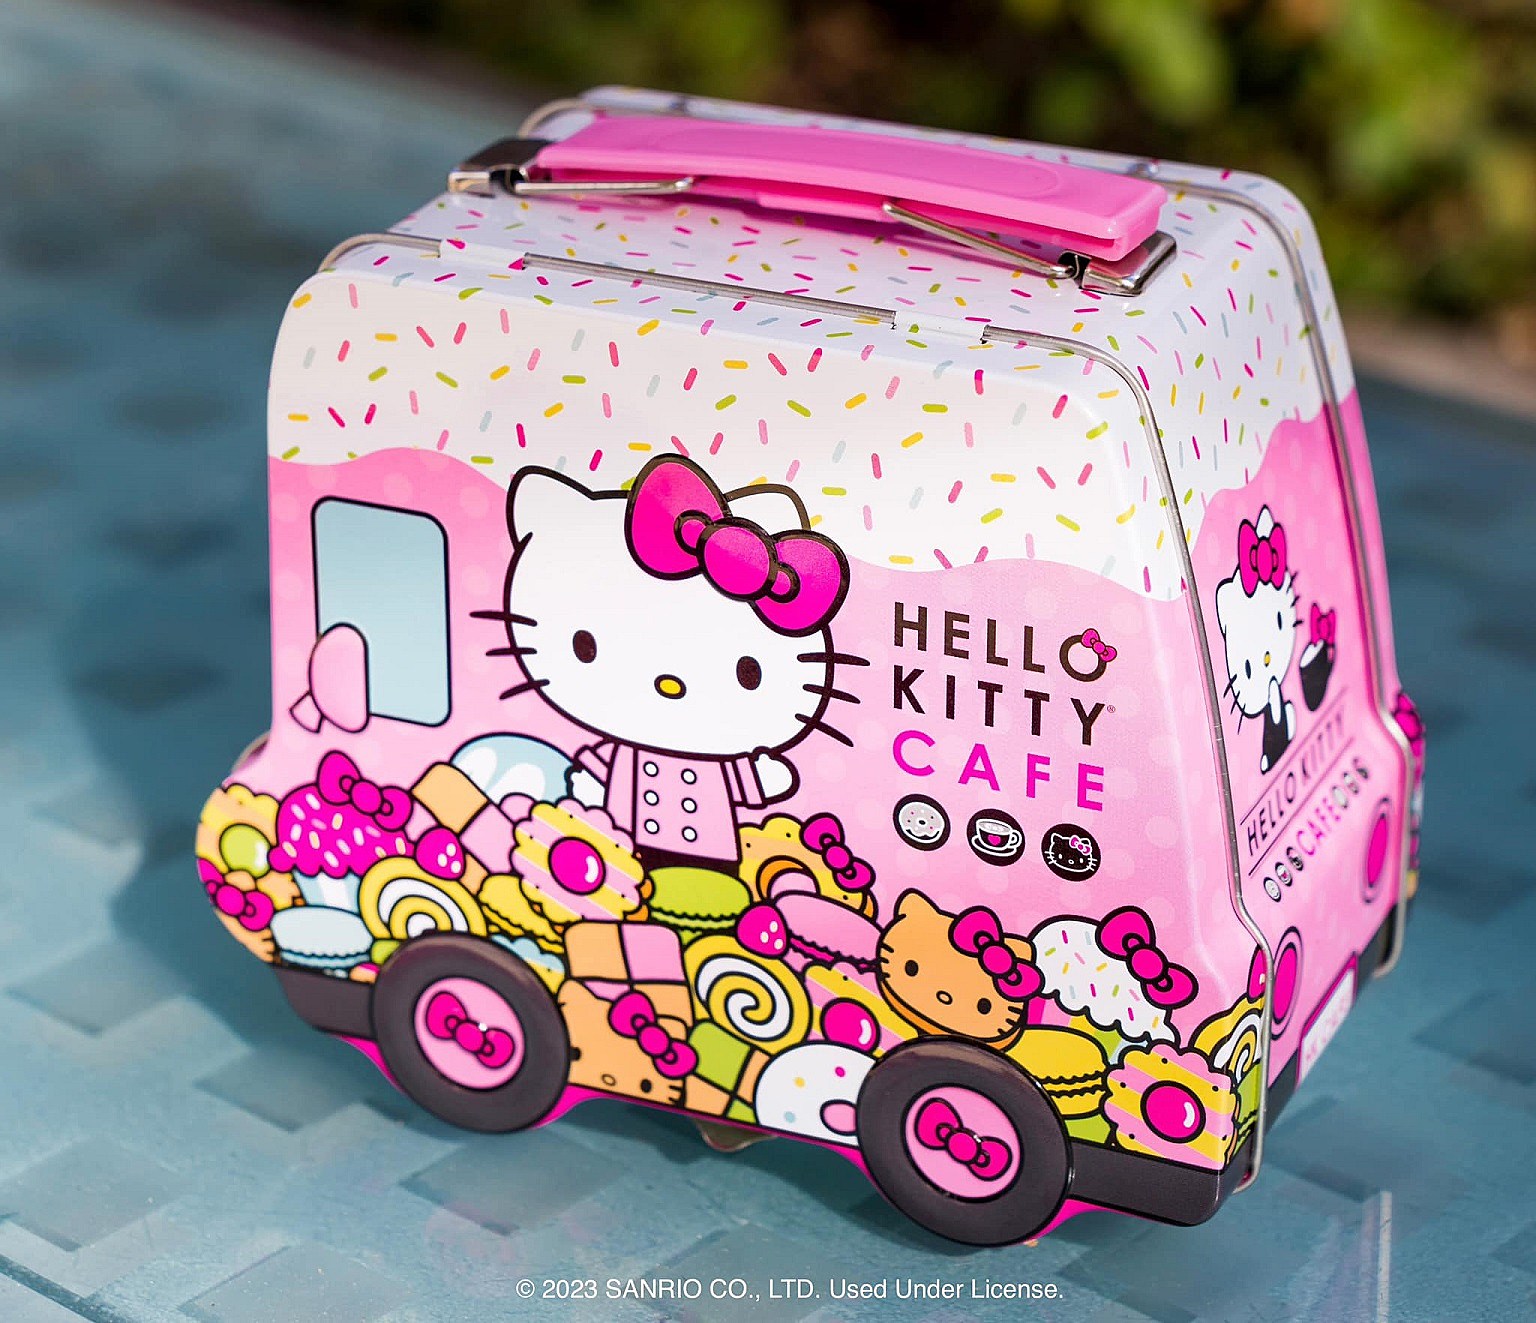 NEW Hello Kitty Cafe Las Vegas Keychain Vegas Exclusive Limited